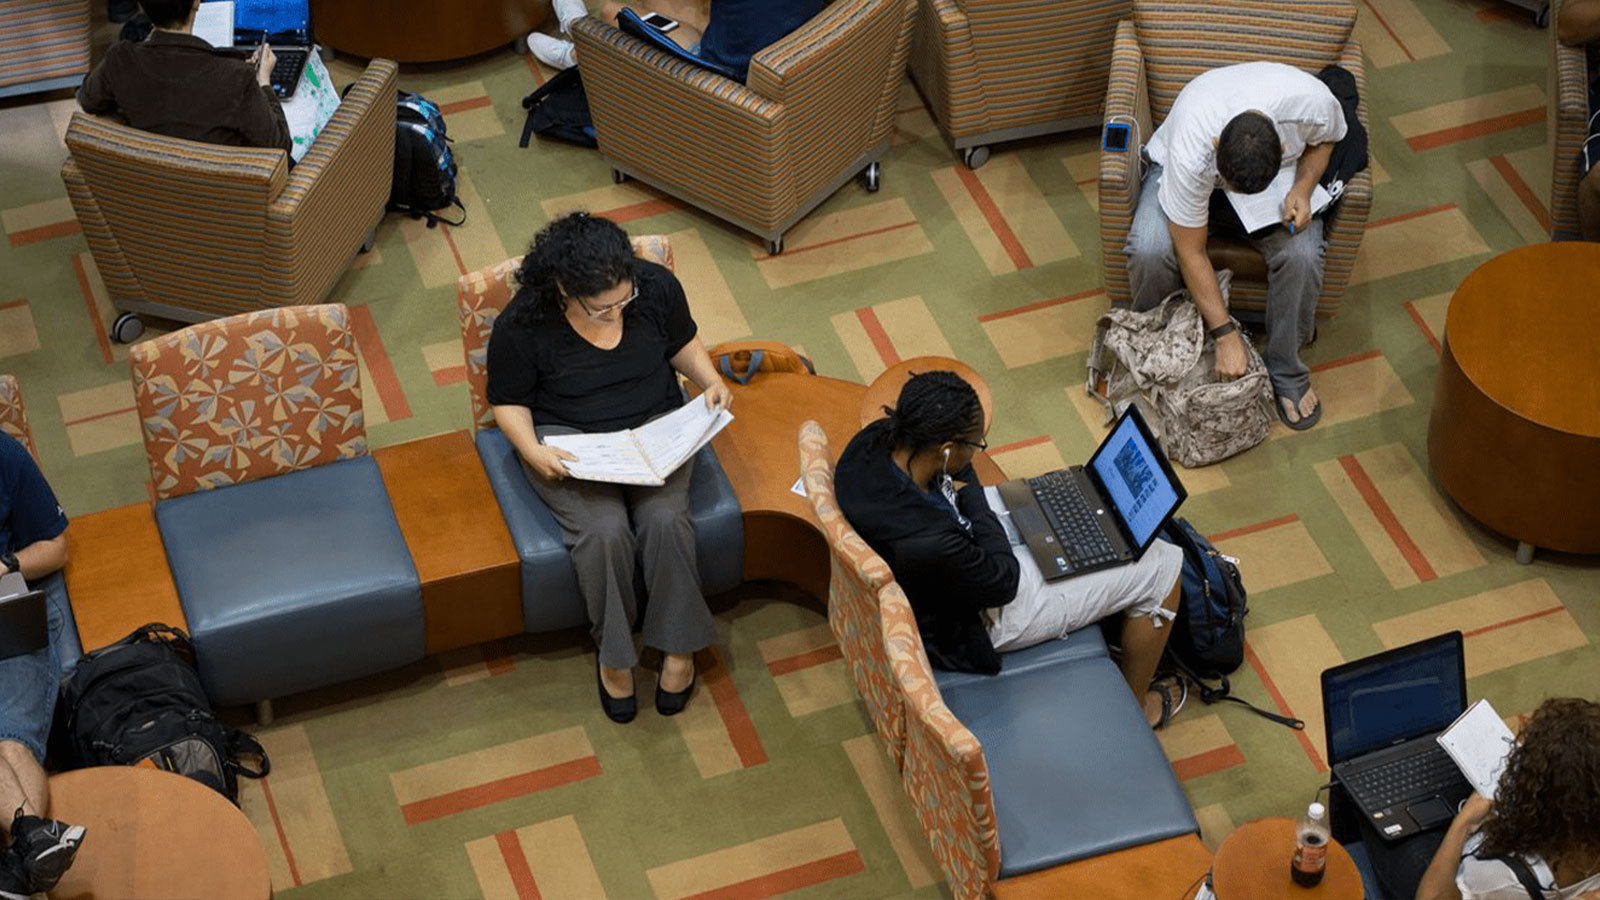 College students studying in a common area